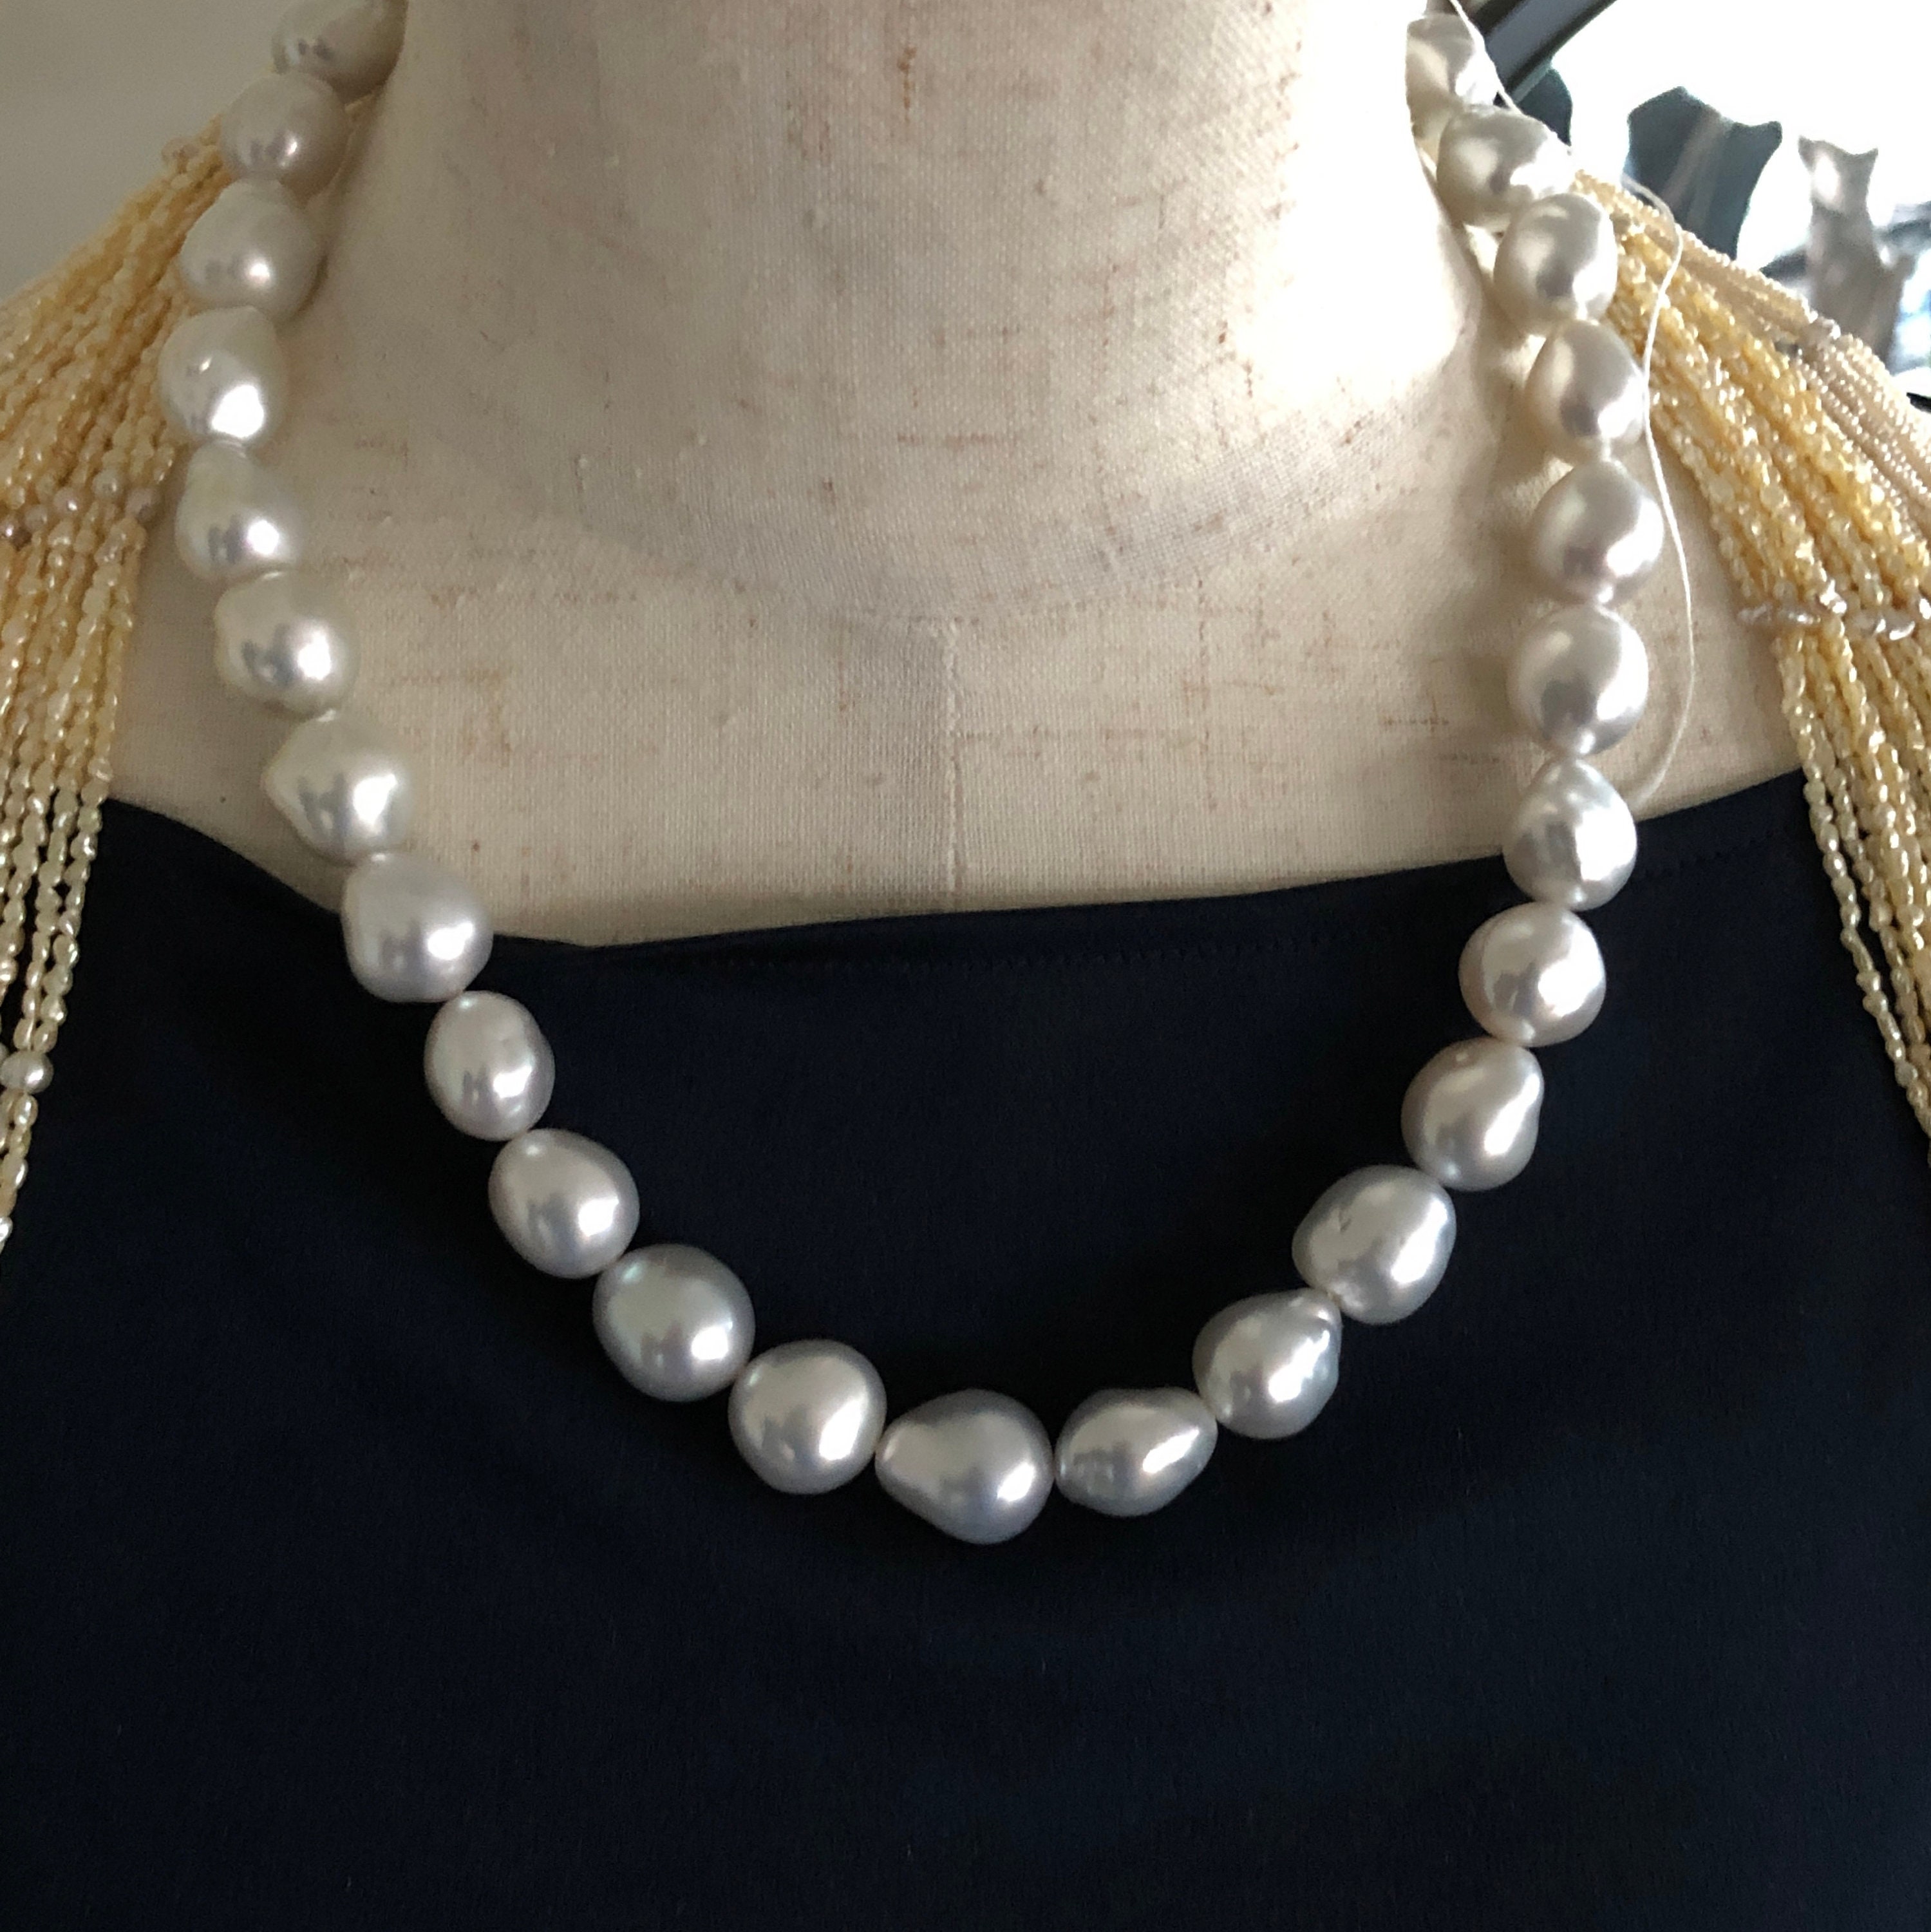 12MM SOUTH SEA baroque pearl necklace genuine pearls natural | Etsy